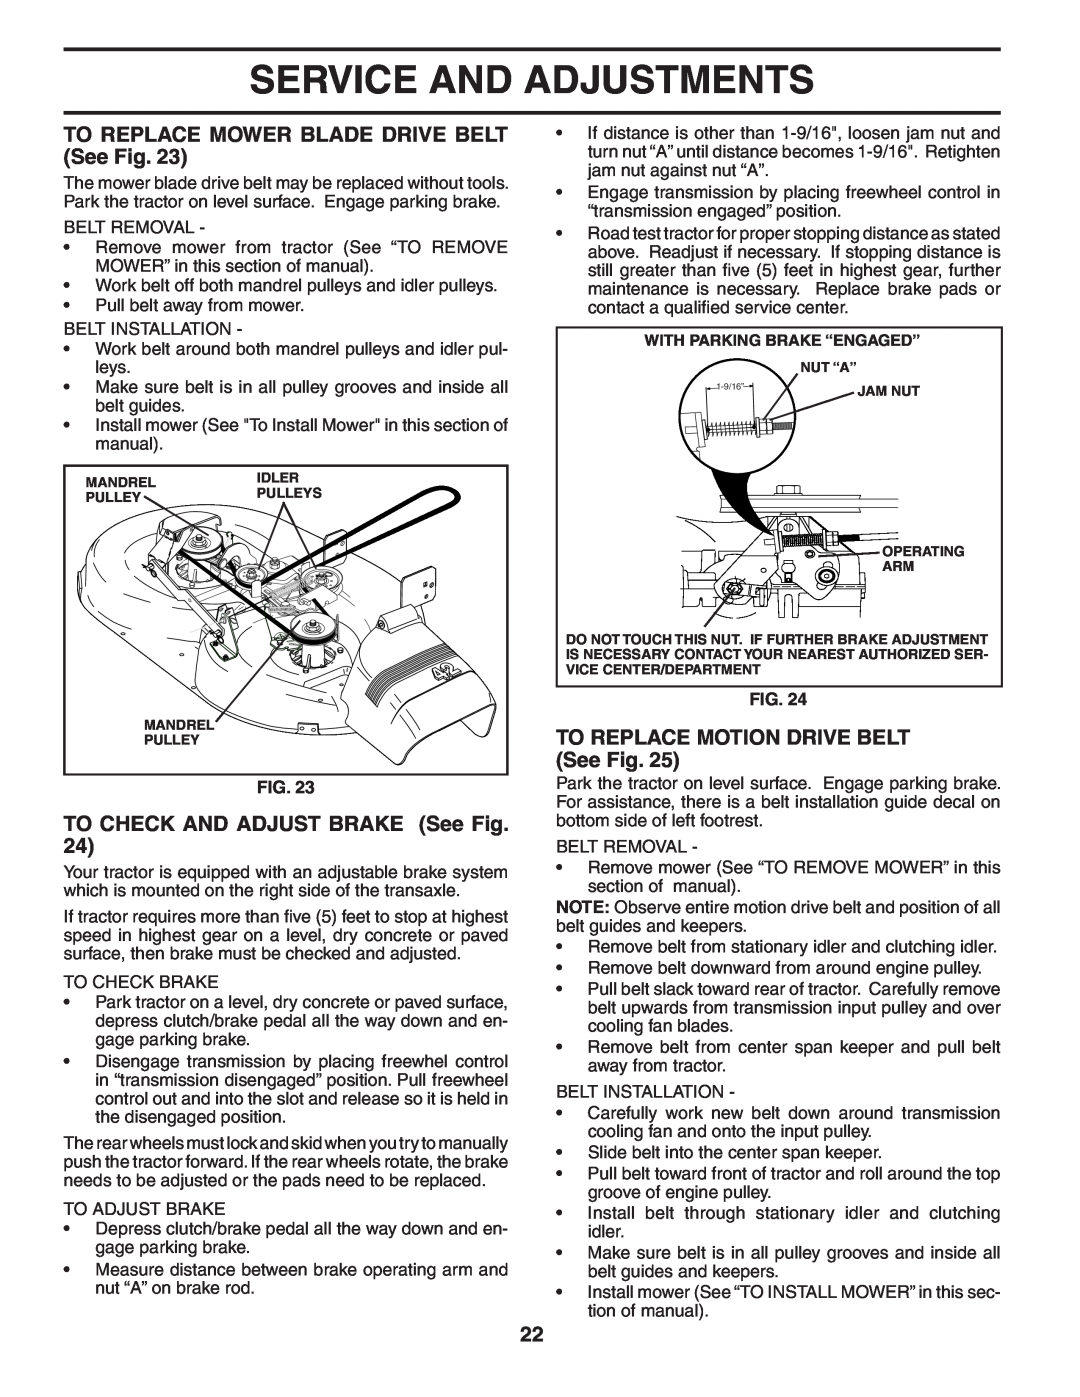 Poulan 184581 TO REPLACE MOWER BLADE DRIVE BELT See Fig, TO CHECK AND ADJUST BRAKE See Fig, Service And Adjustments 